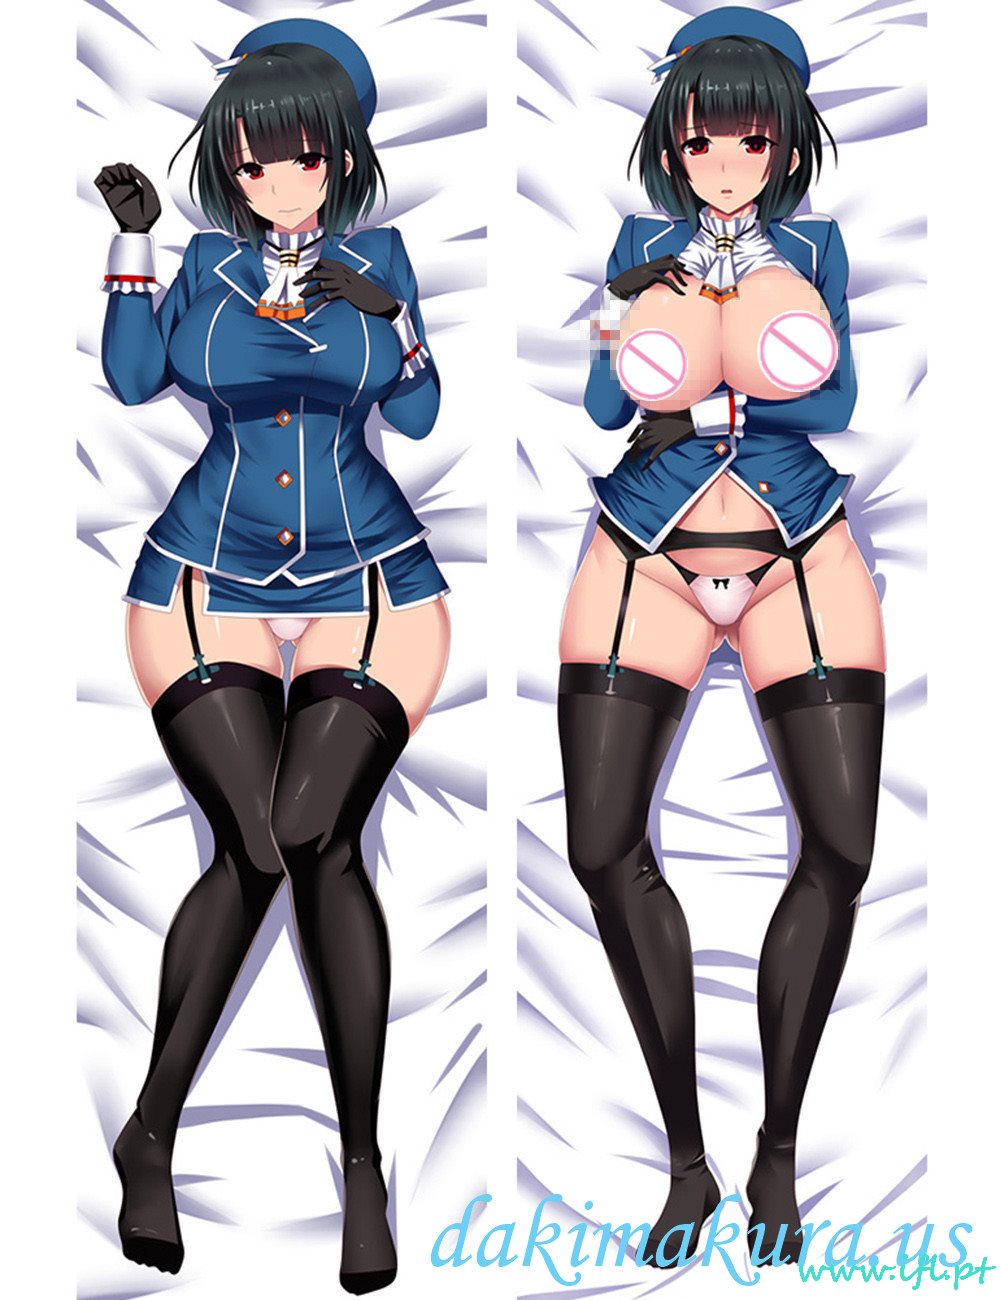 Cheap Takao - Kantai Collection Anime Dakimakura Japanese Love Body Pillow Cover From China Factory